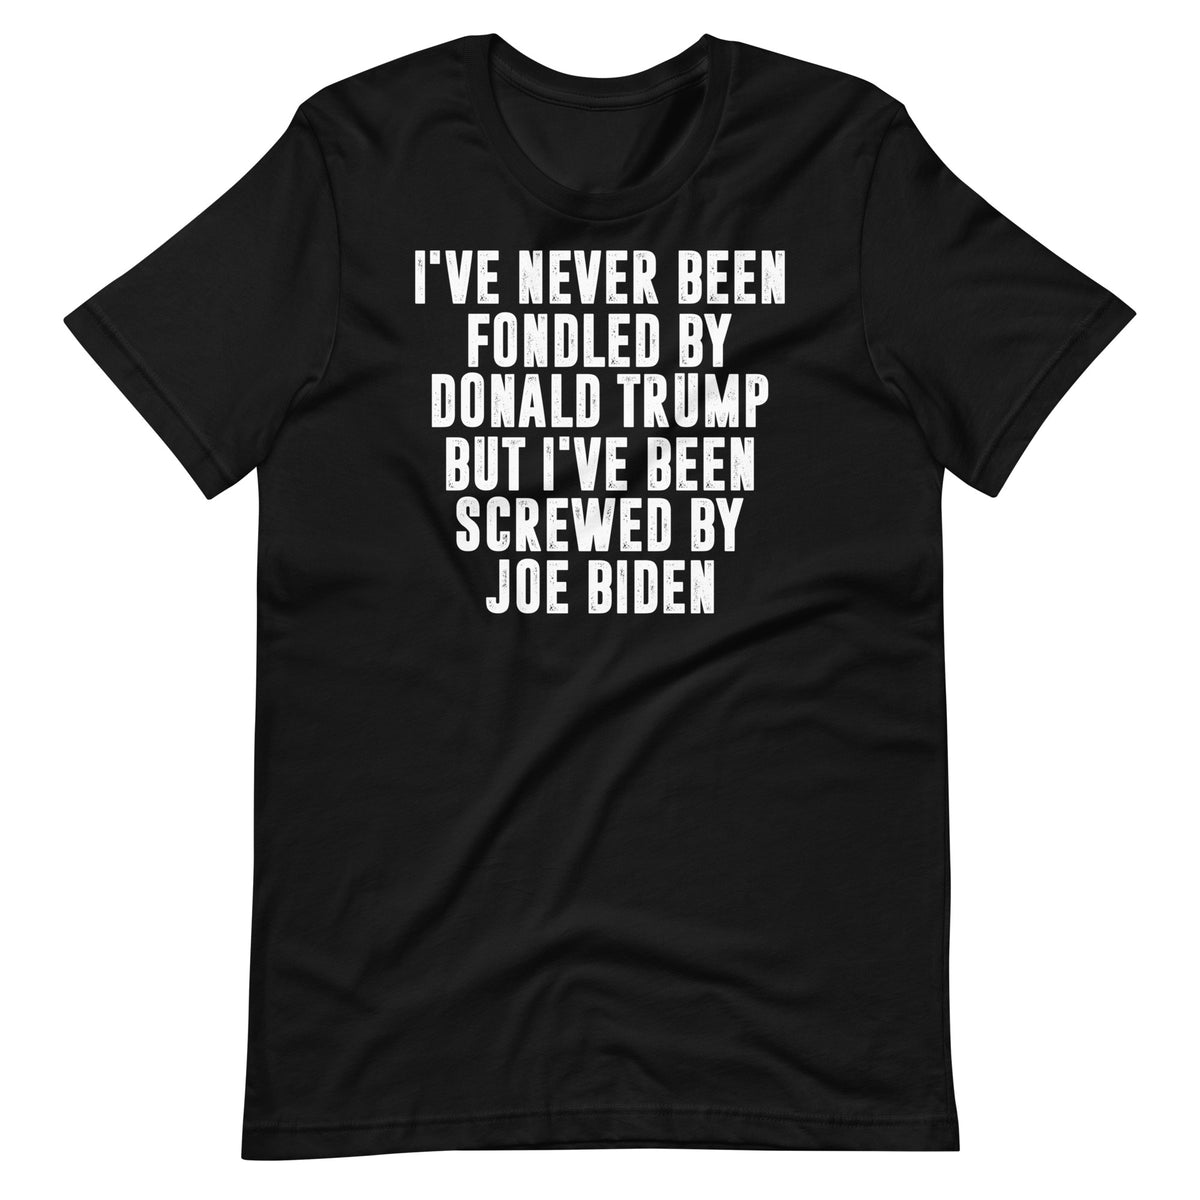 BELLA + CANVAS BRAND - I've Never Been Fondled by Donald Trump